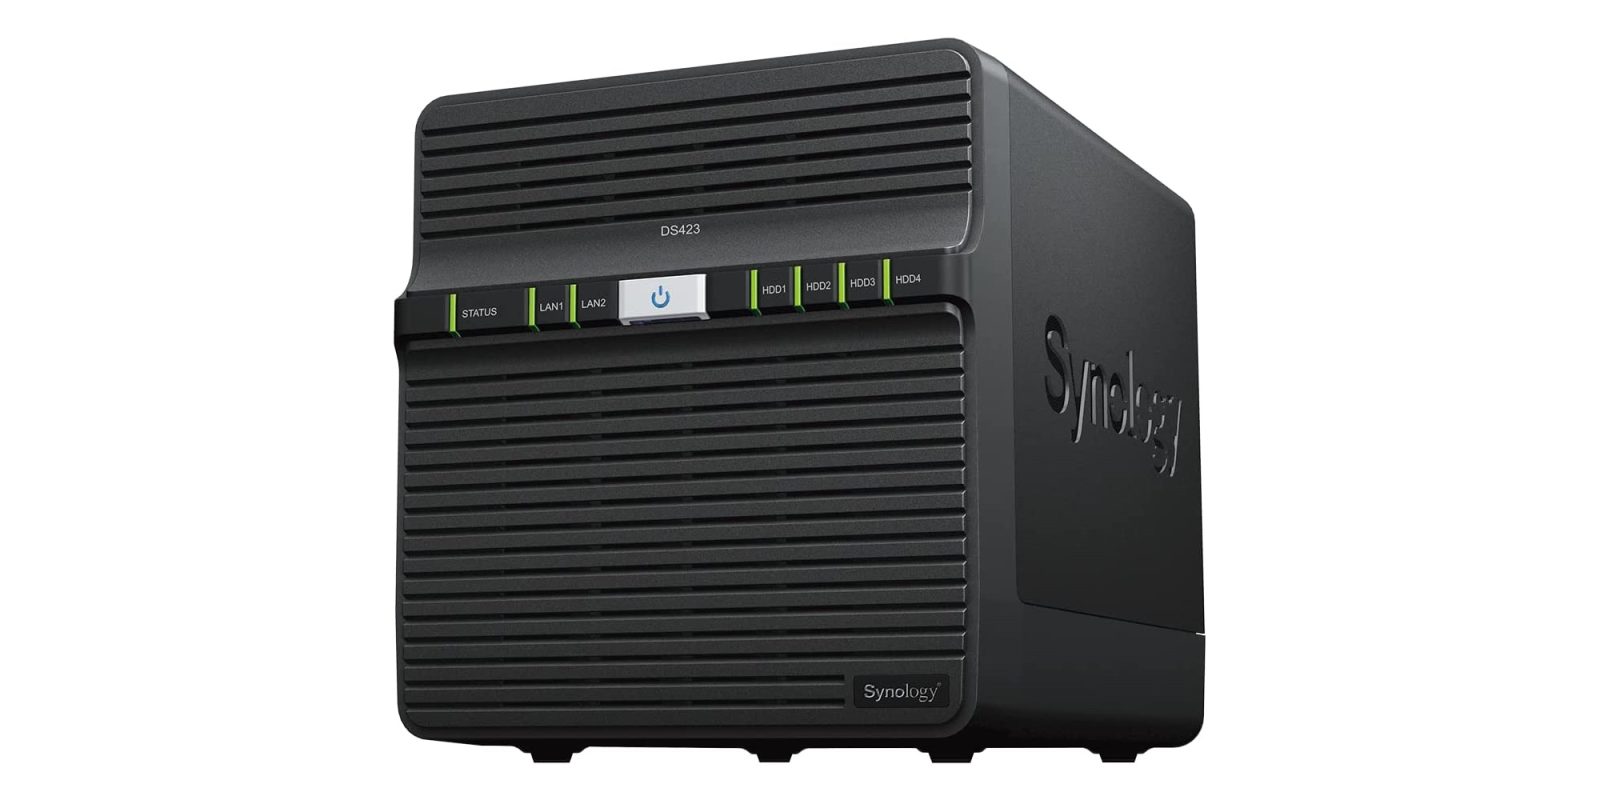 Synology debuts new budget friendly 4 bay ds423 nas with 370 price